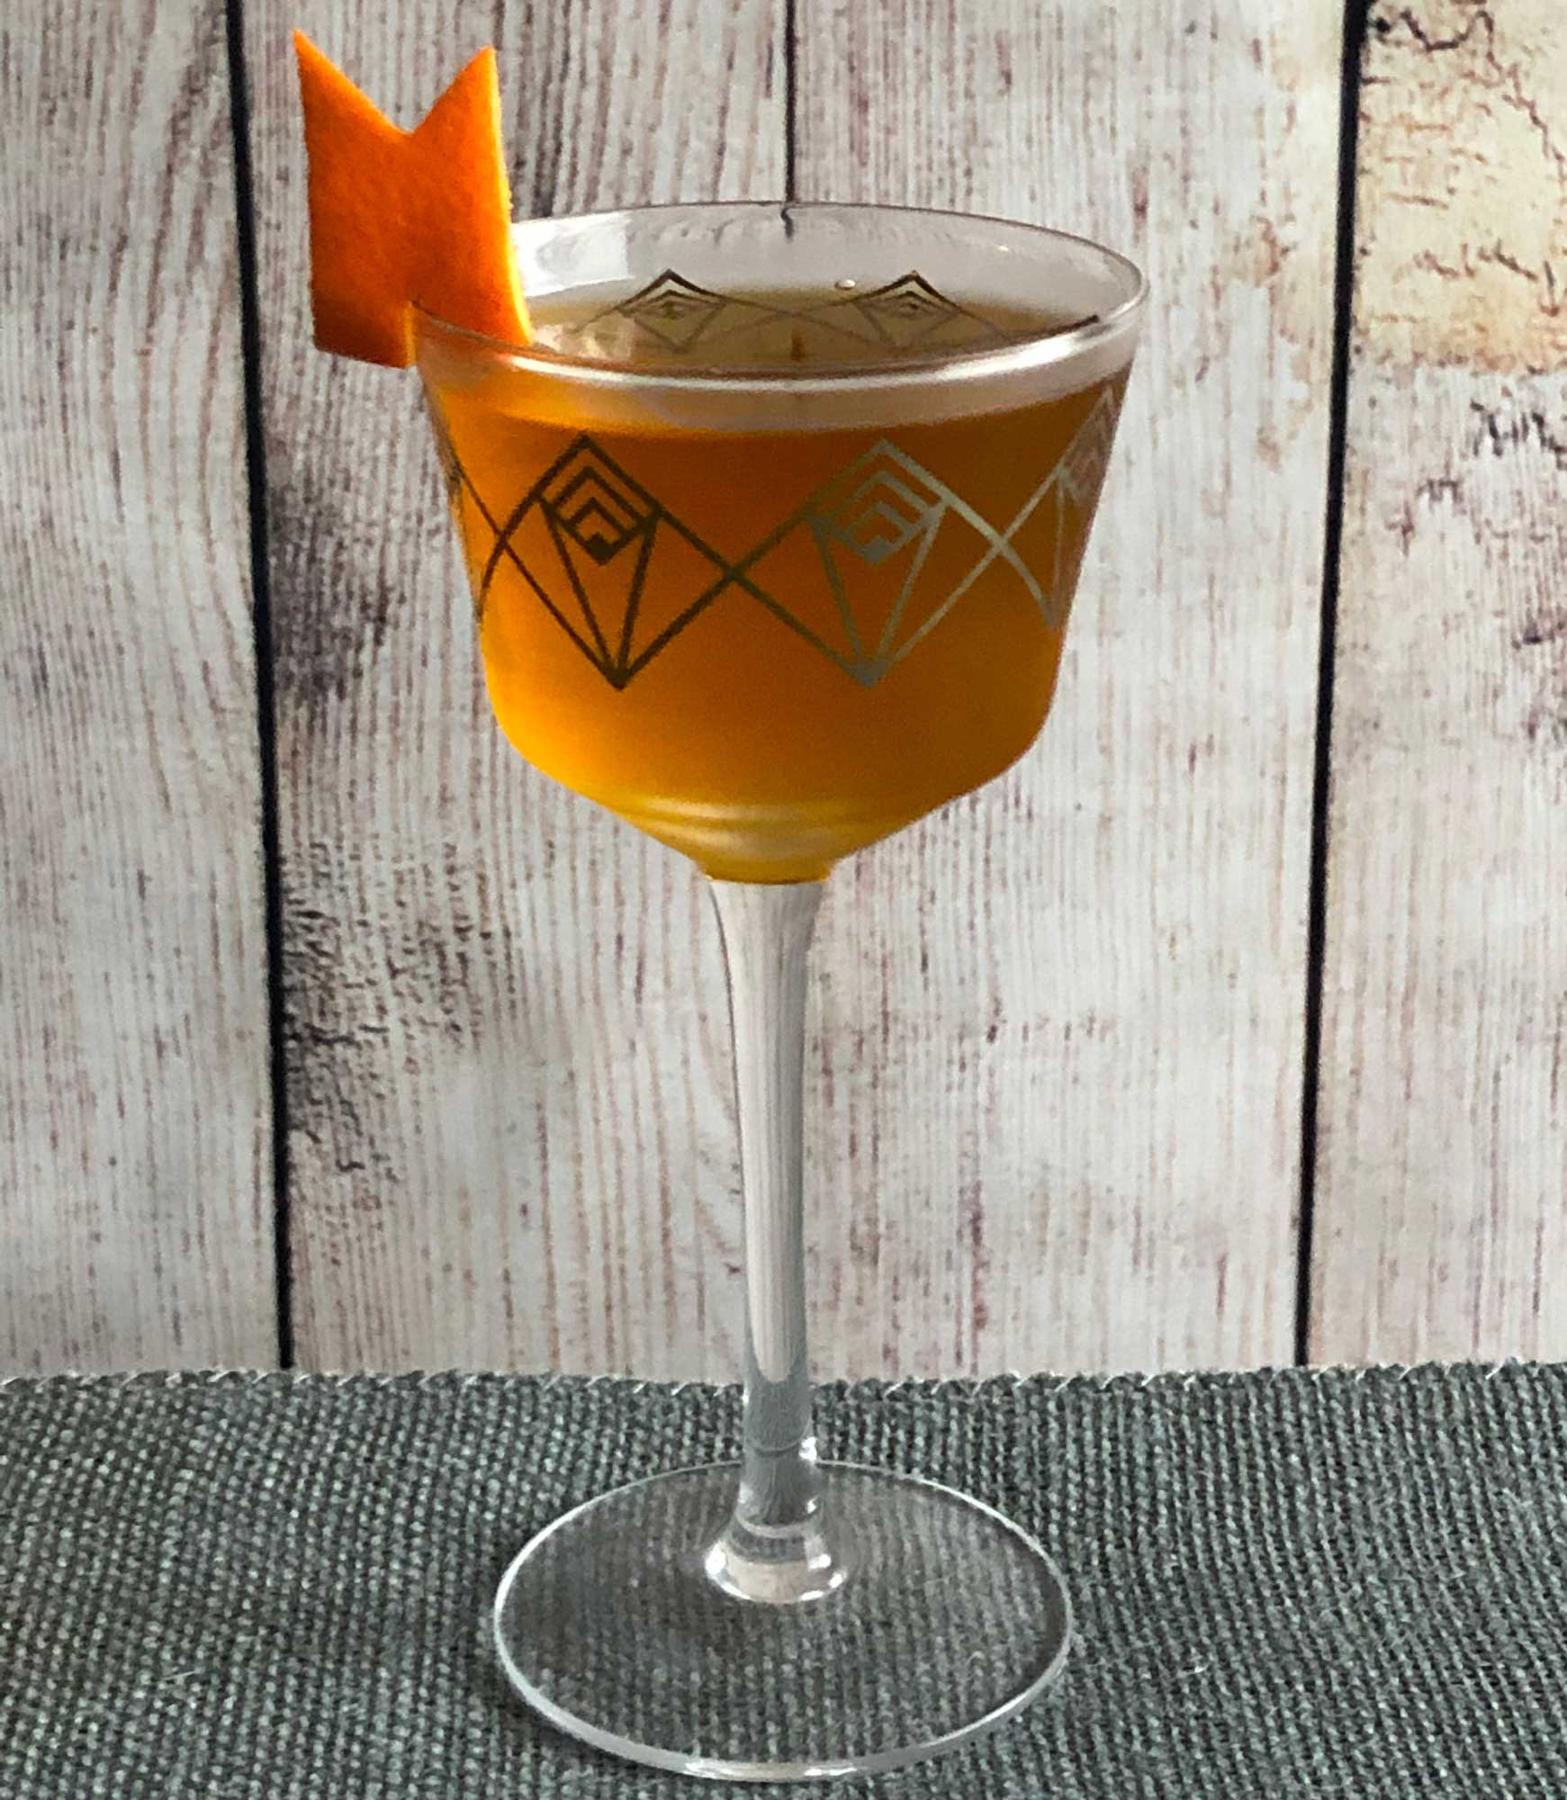 An example of the Accidental Cocktail, the mixed drink (drink), adapted from the Occidental, PDT, New York City, featuring Batavia Arrack van Oosten, orange-flavored liqueur, Cardamaro Vino Amaro, Elisir Novasalus, kosher salt, and orange twist; photo by Lee Edwards